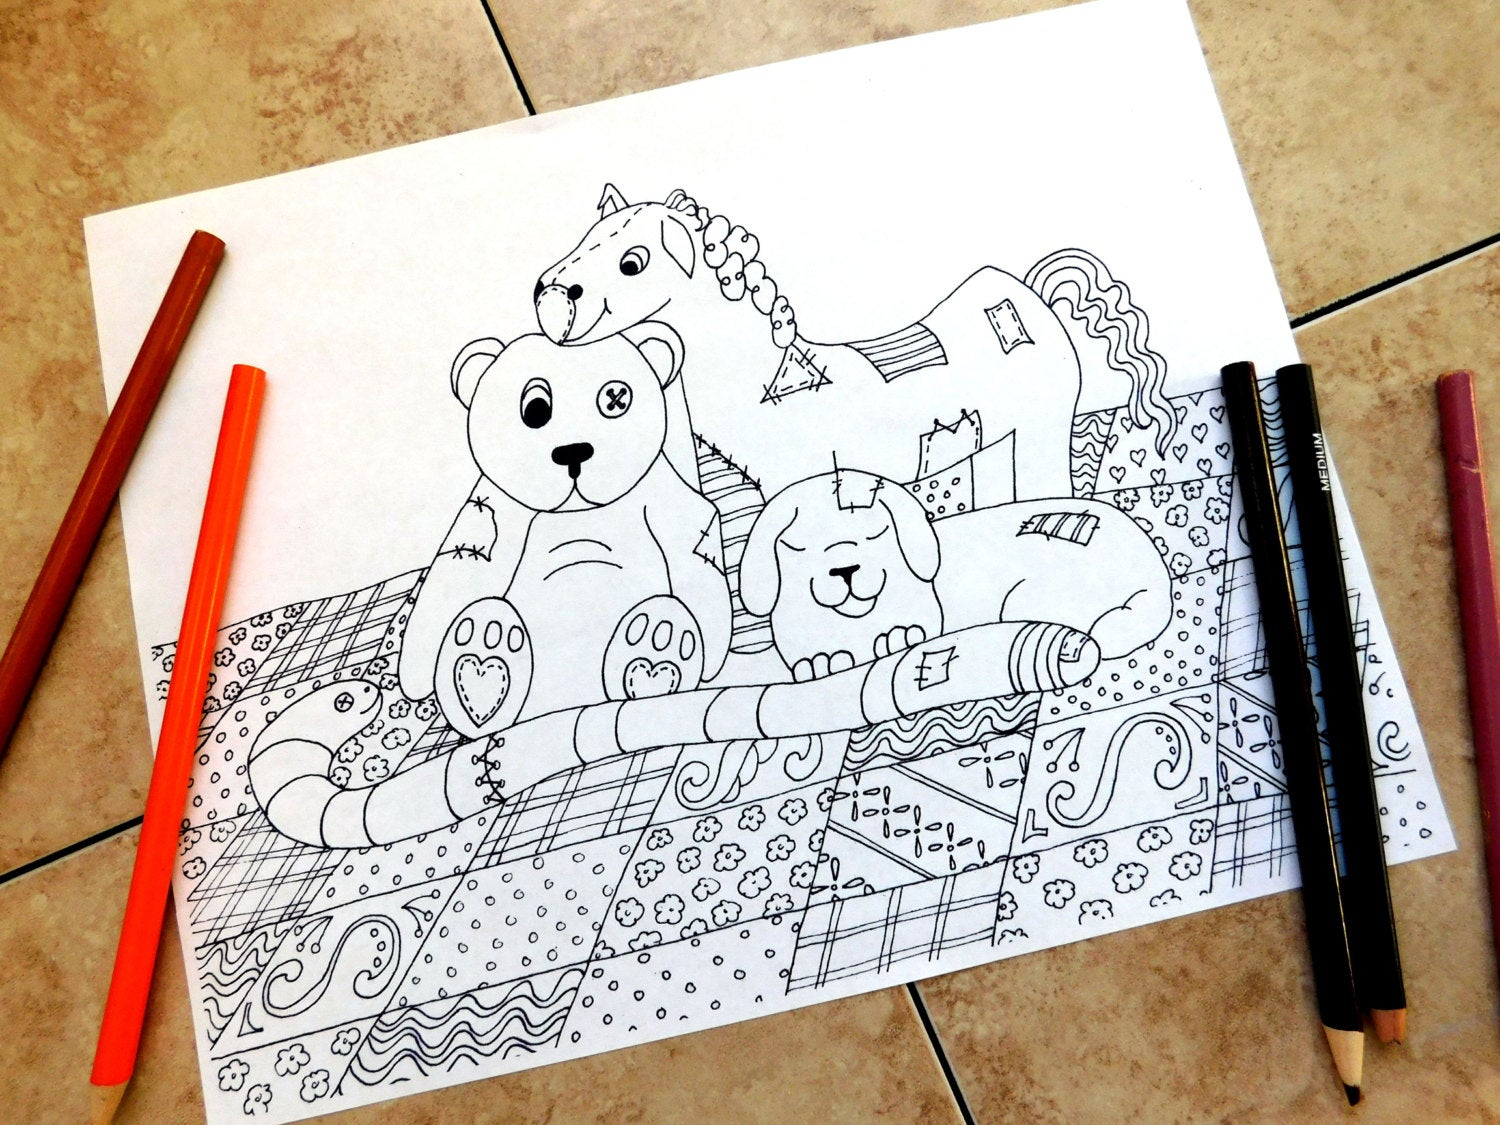 Coloring Pages Of Stuffed Animals Stuffed Animals Coloring Pages Adult Coloring Page Teddy Bear Patchwork Quilt Coloring Page Coloring Page Printable